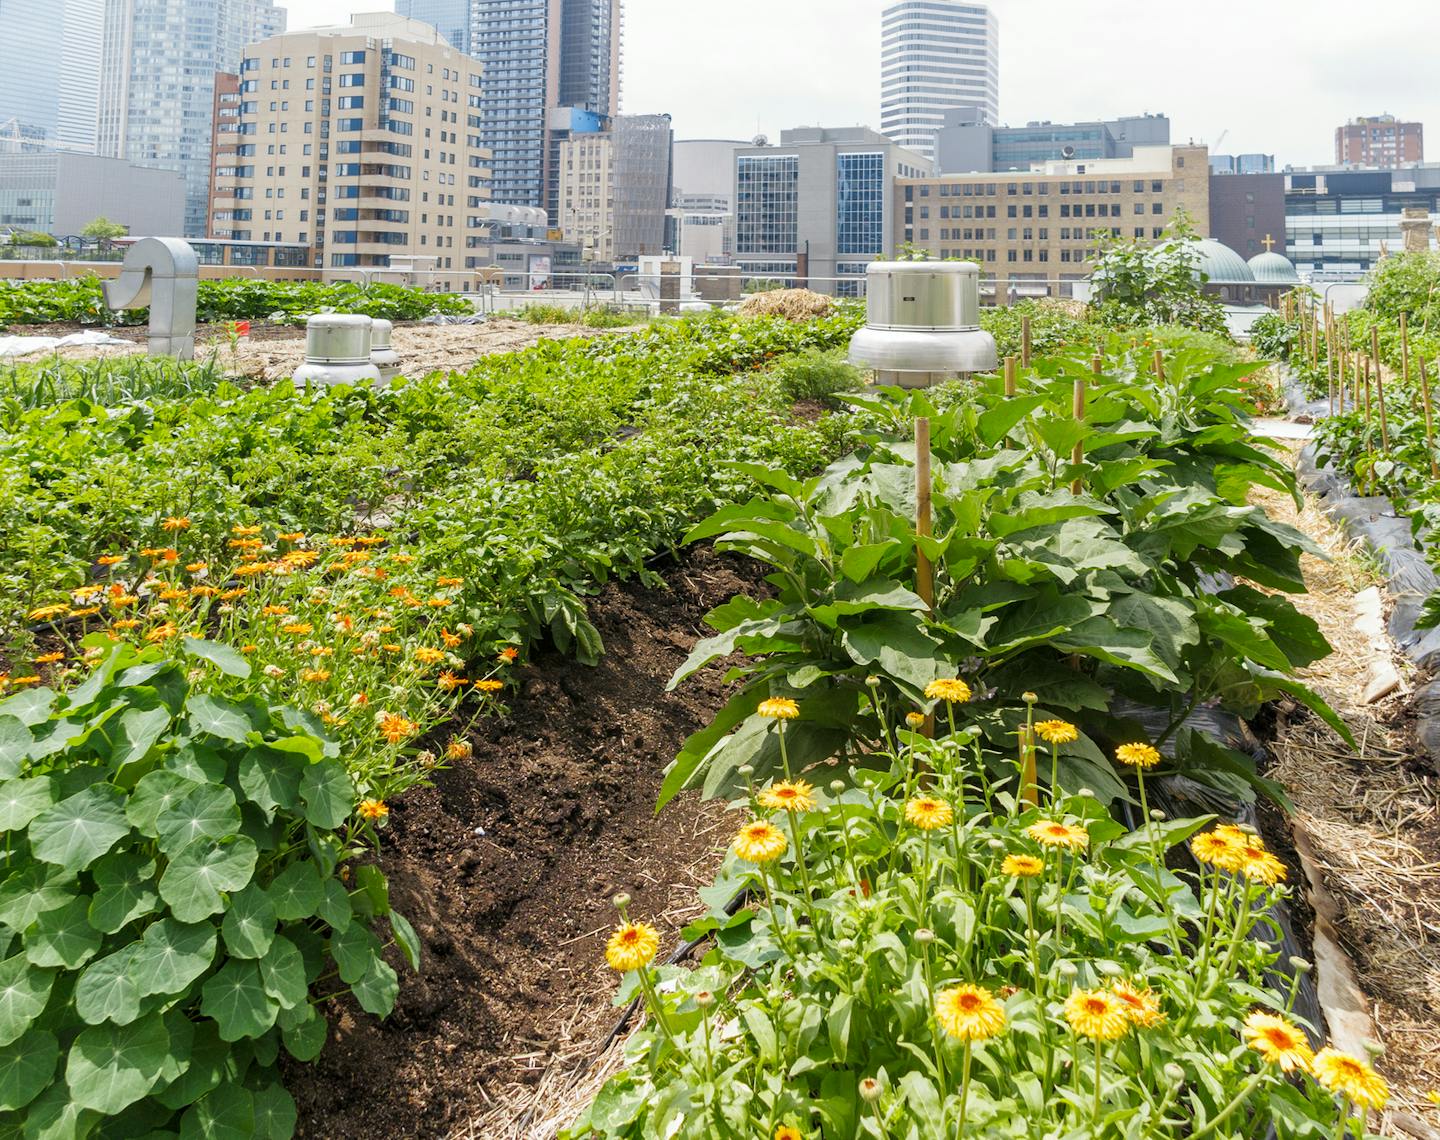 From urban gardens to agrihoods: The rise of agricultural neighborhoods in Detroit